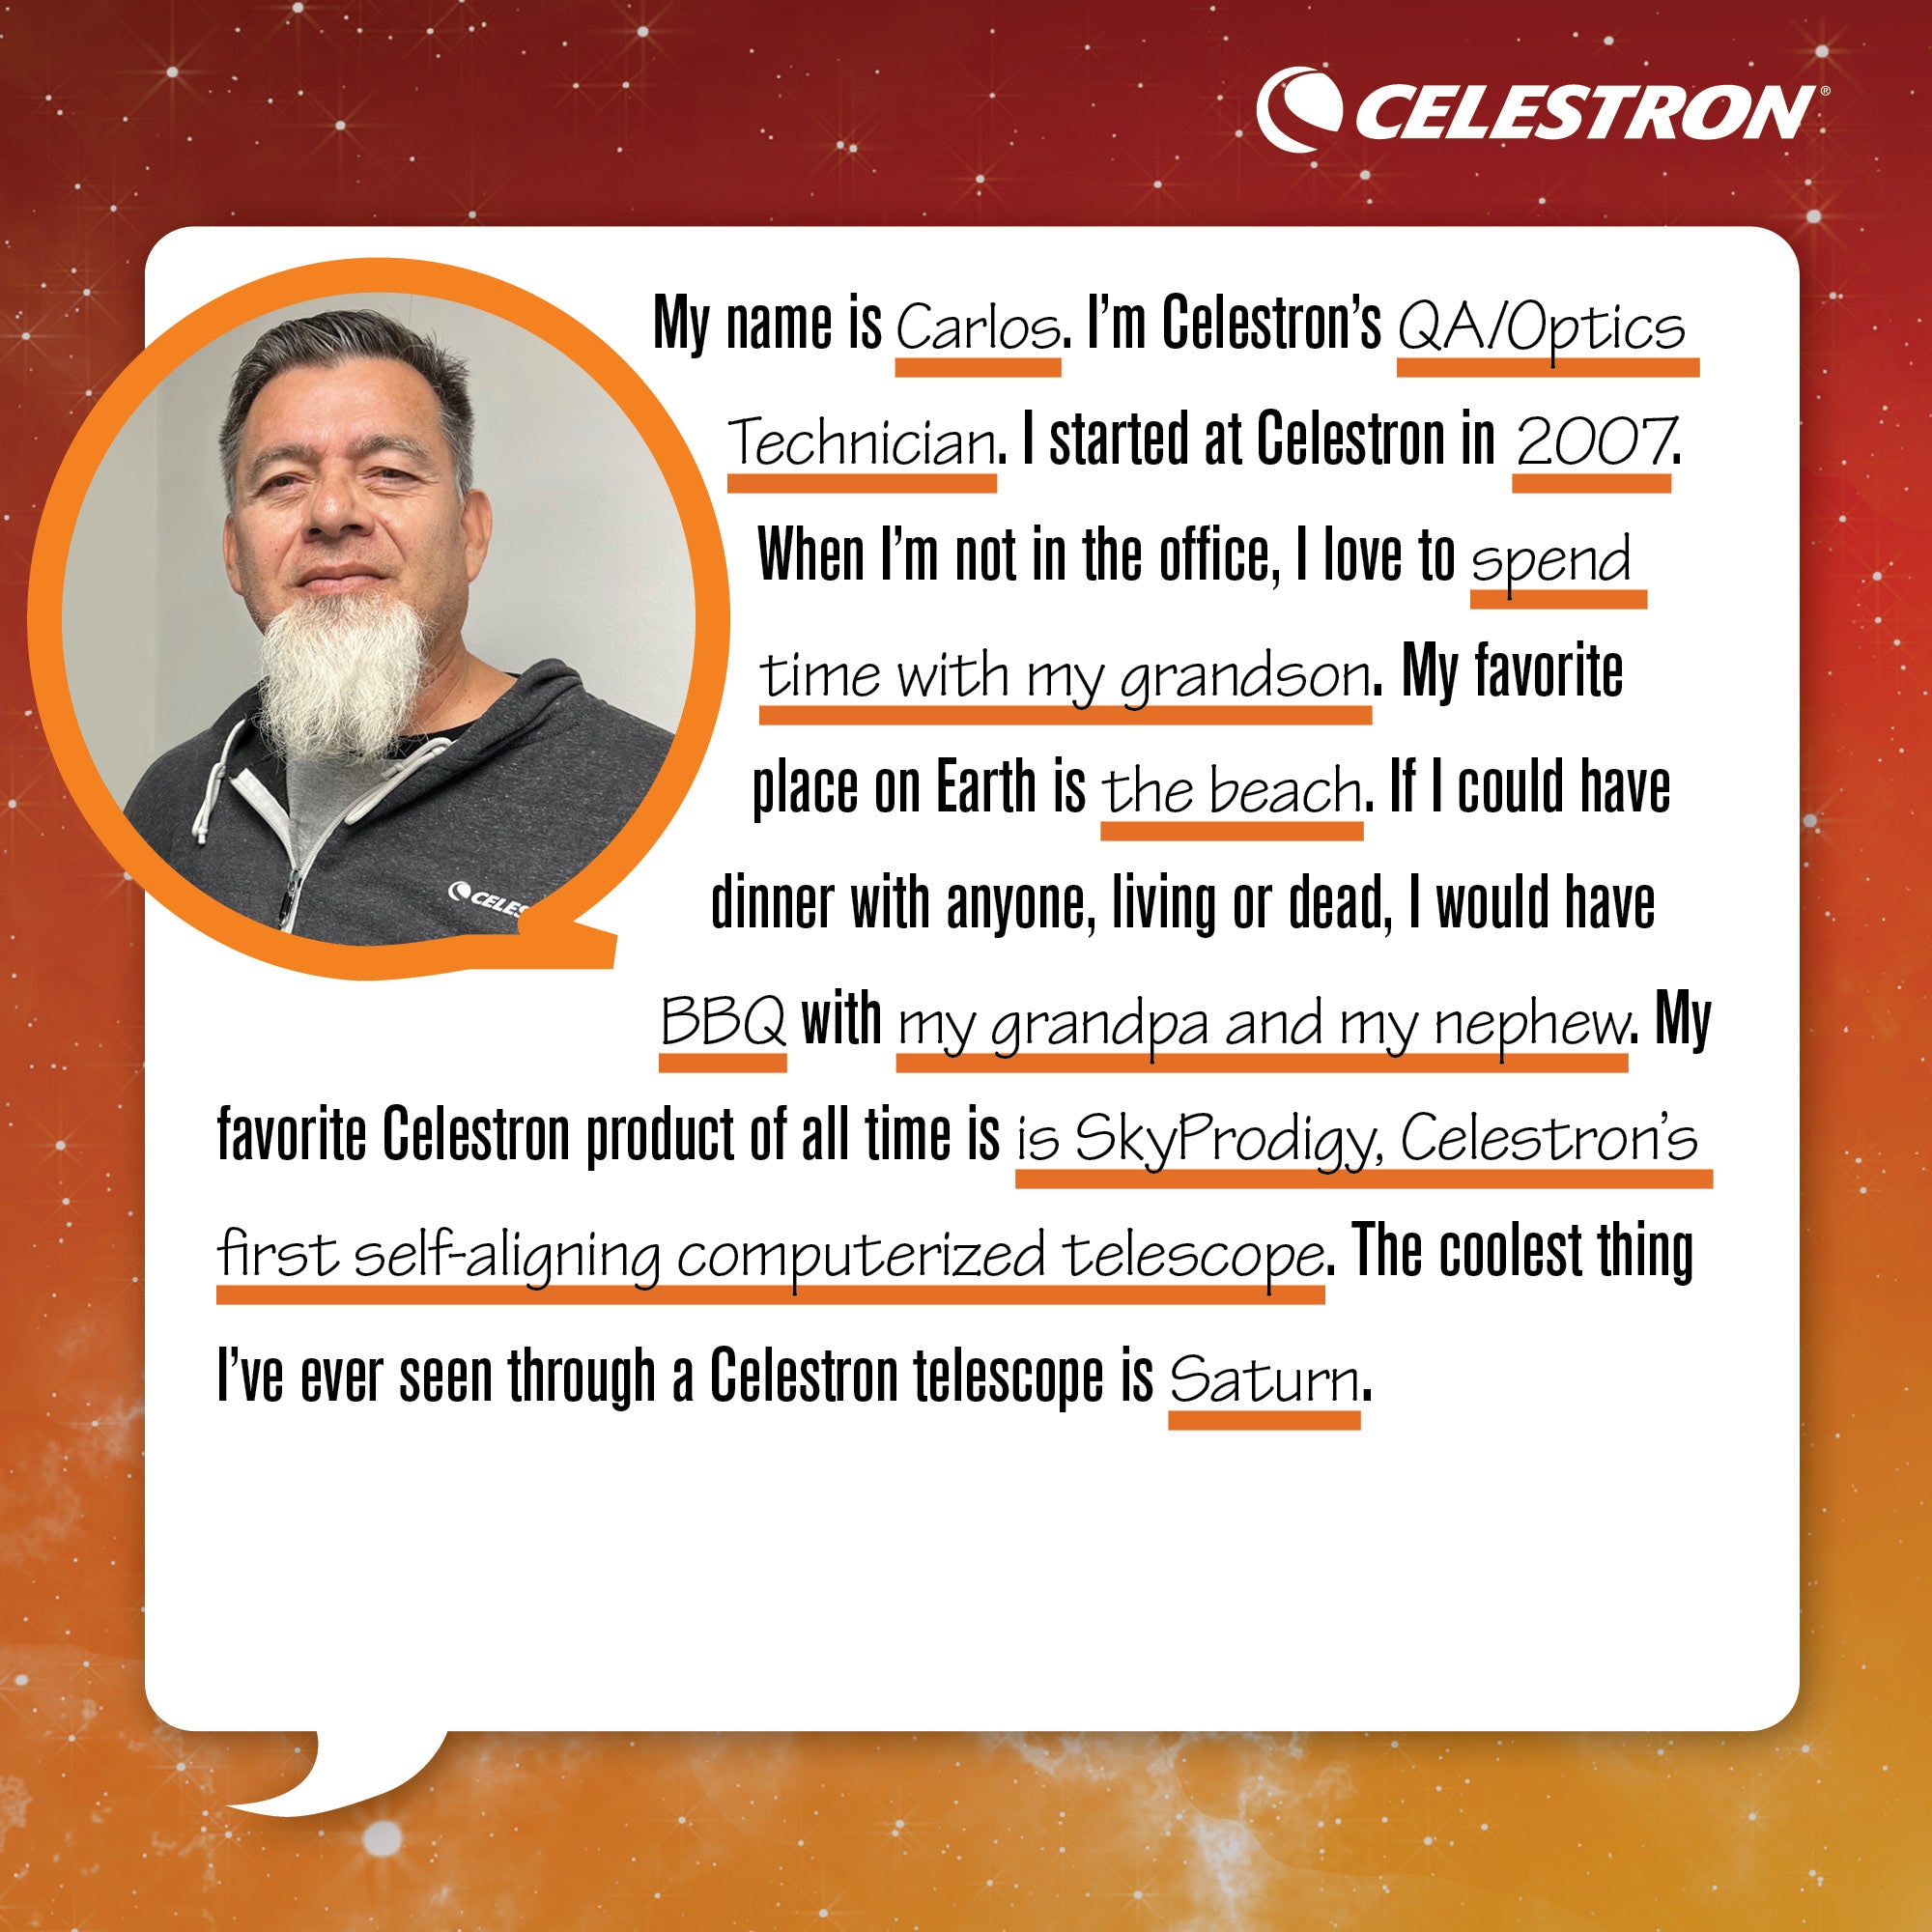 My name is Carlos. I'm Celestron's QA/Optic Technician. I started at Celestron in 2007. When I'm not in the office, I love to spend time with my grandson.  My favorite place on Earth is the beach. If I could have dinner with anyone, living or dead, I would have BBQ with my grandpa and my nephew. My favorite Celestron product of all time is SkyProdigy, Celestron's first self-aligning computerized telescope. The coolest thing I've ever seen through a Celestron telescope is Saturn.